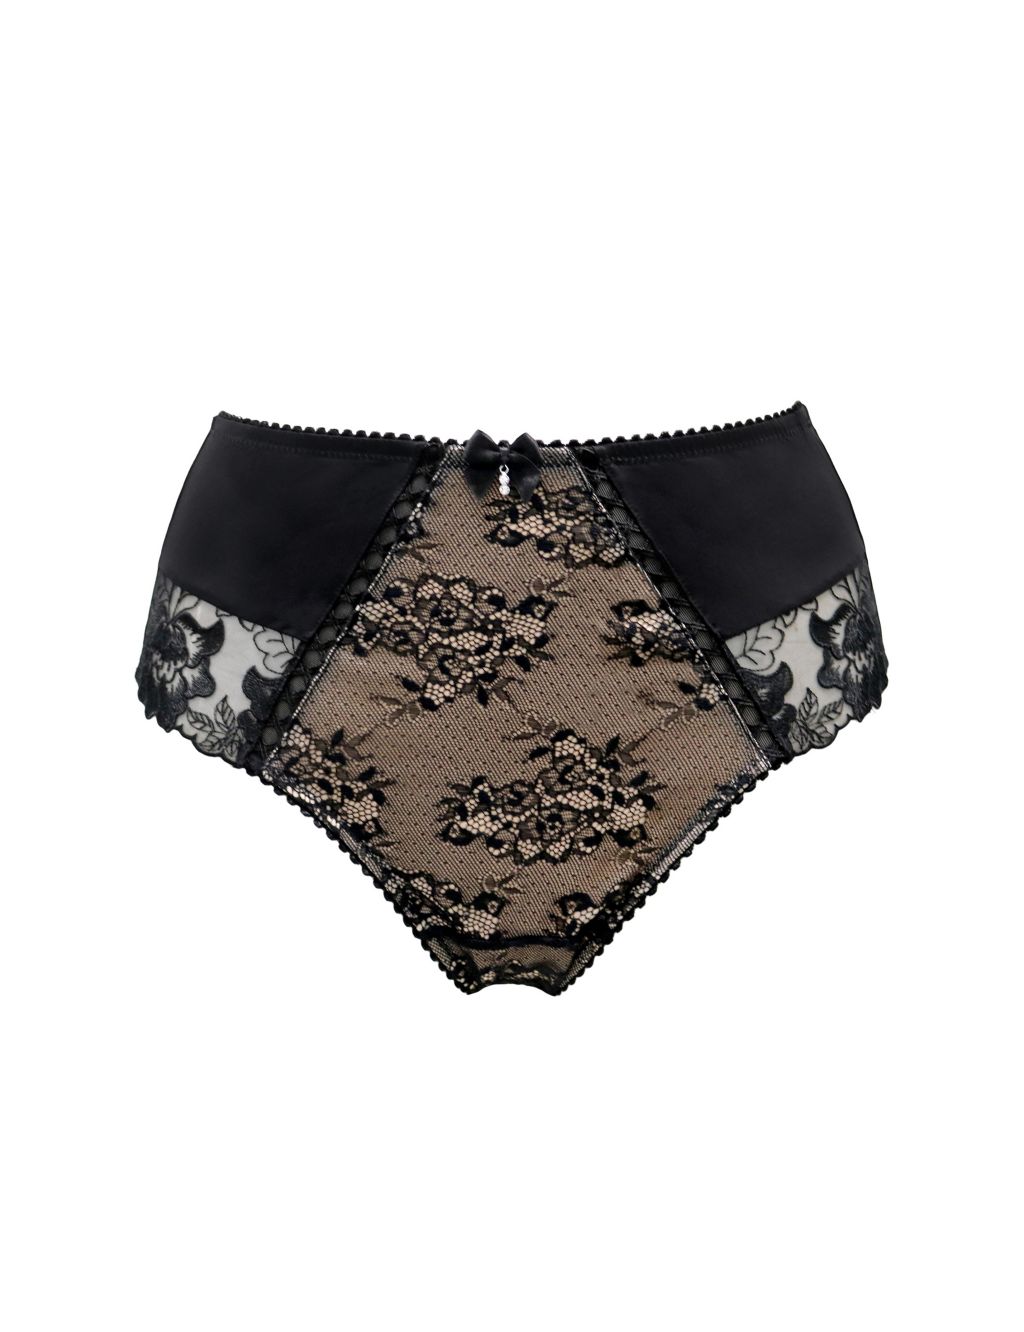 Sofia Lace Embroidered Full Briefs image 2